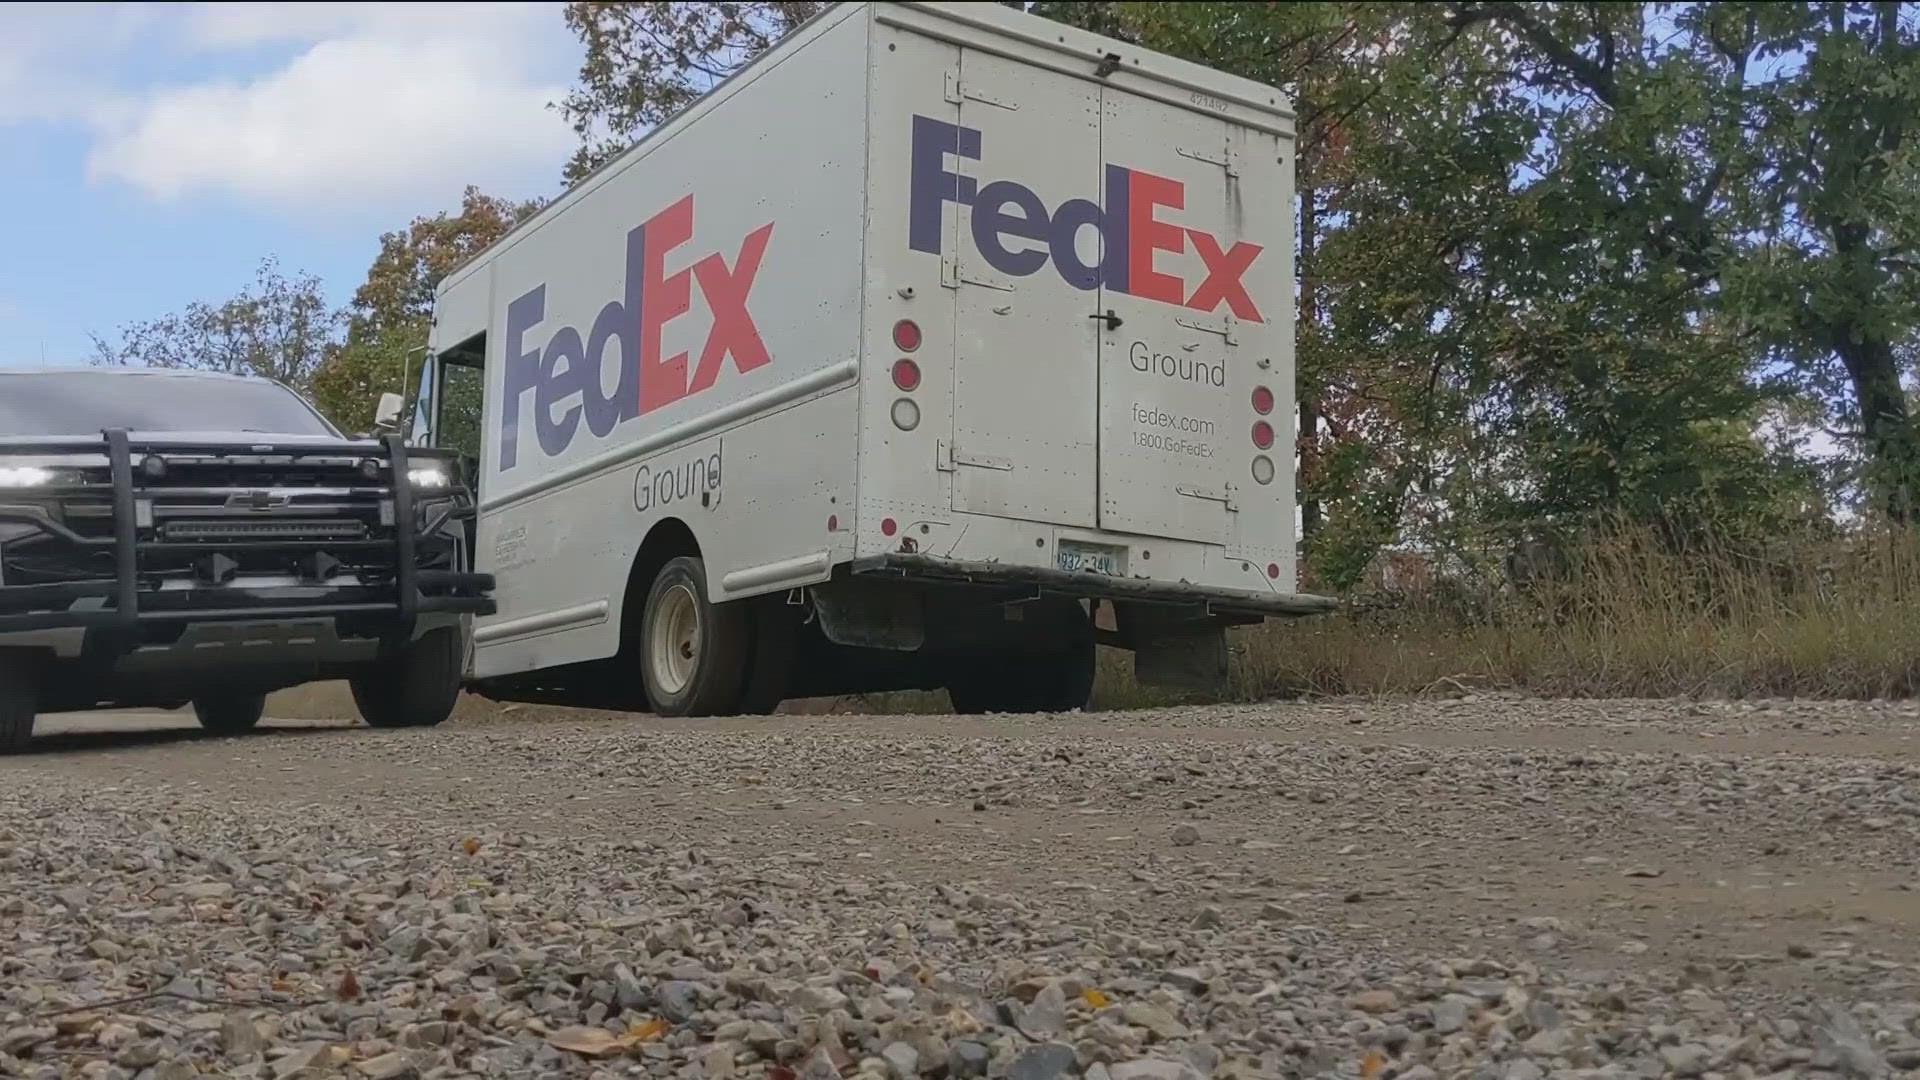 Oklahoma school lockdown was lifted after a FedEx driver staged an armed robbery incident.